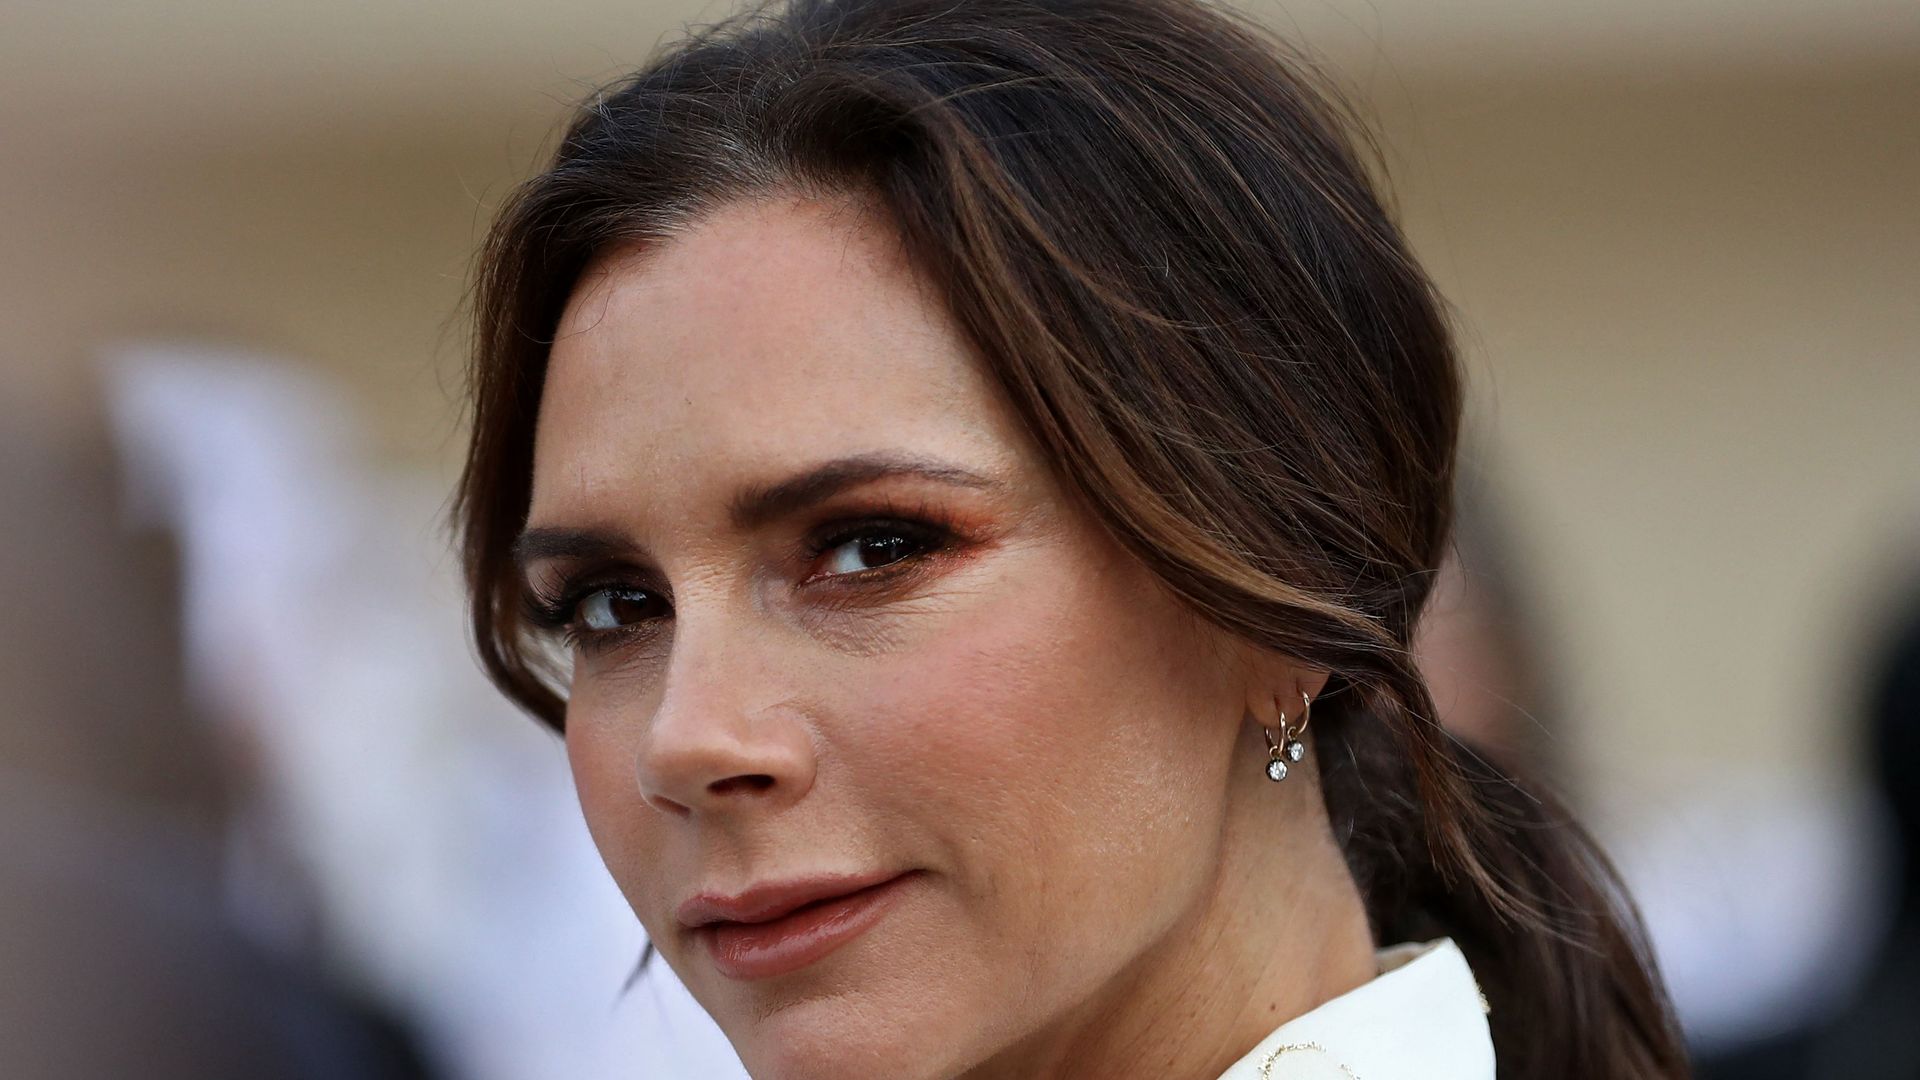 Victoria Beckham shares unseen corner of country mansion – and the ceilings will make your jaw drop